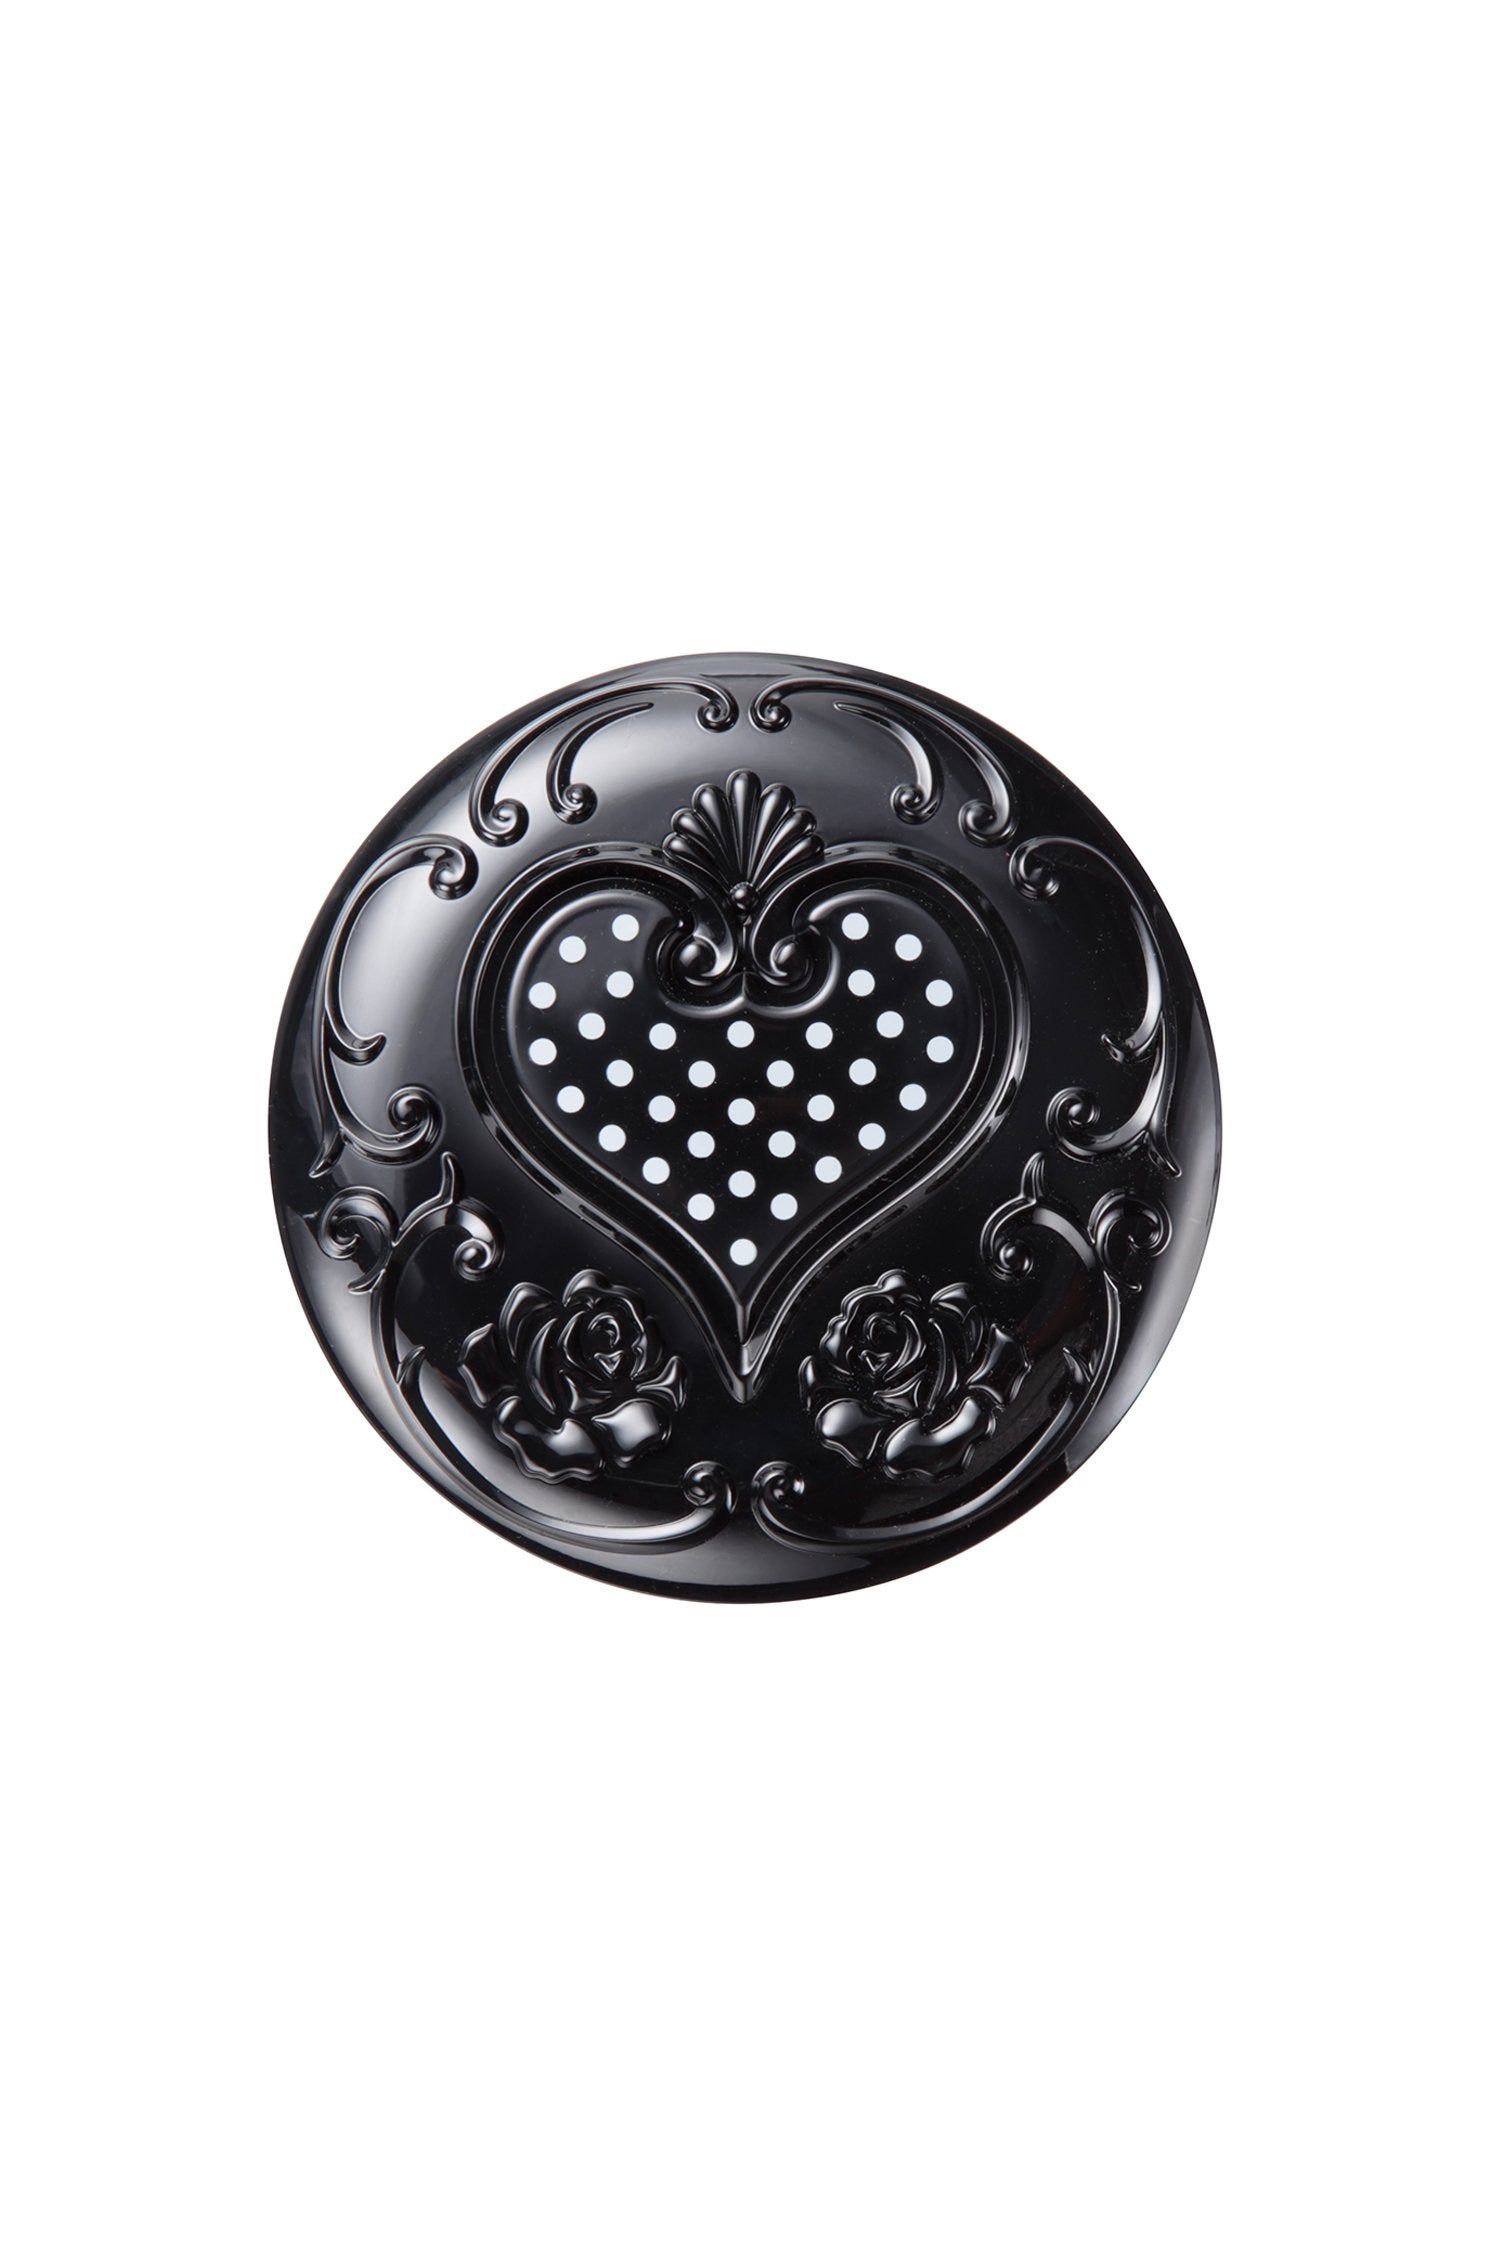 Black rounded lid with an engraved floral design and a heart with white dots